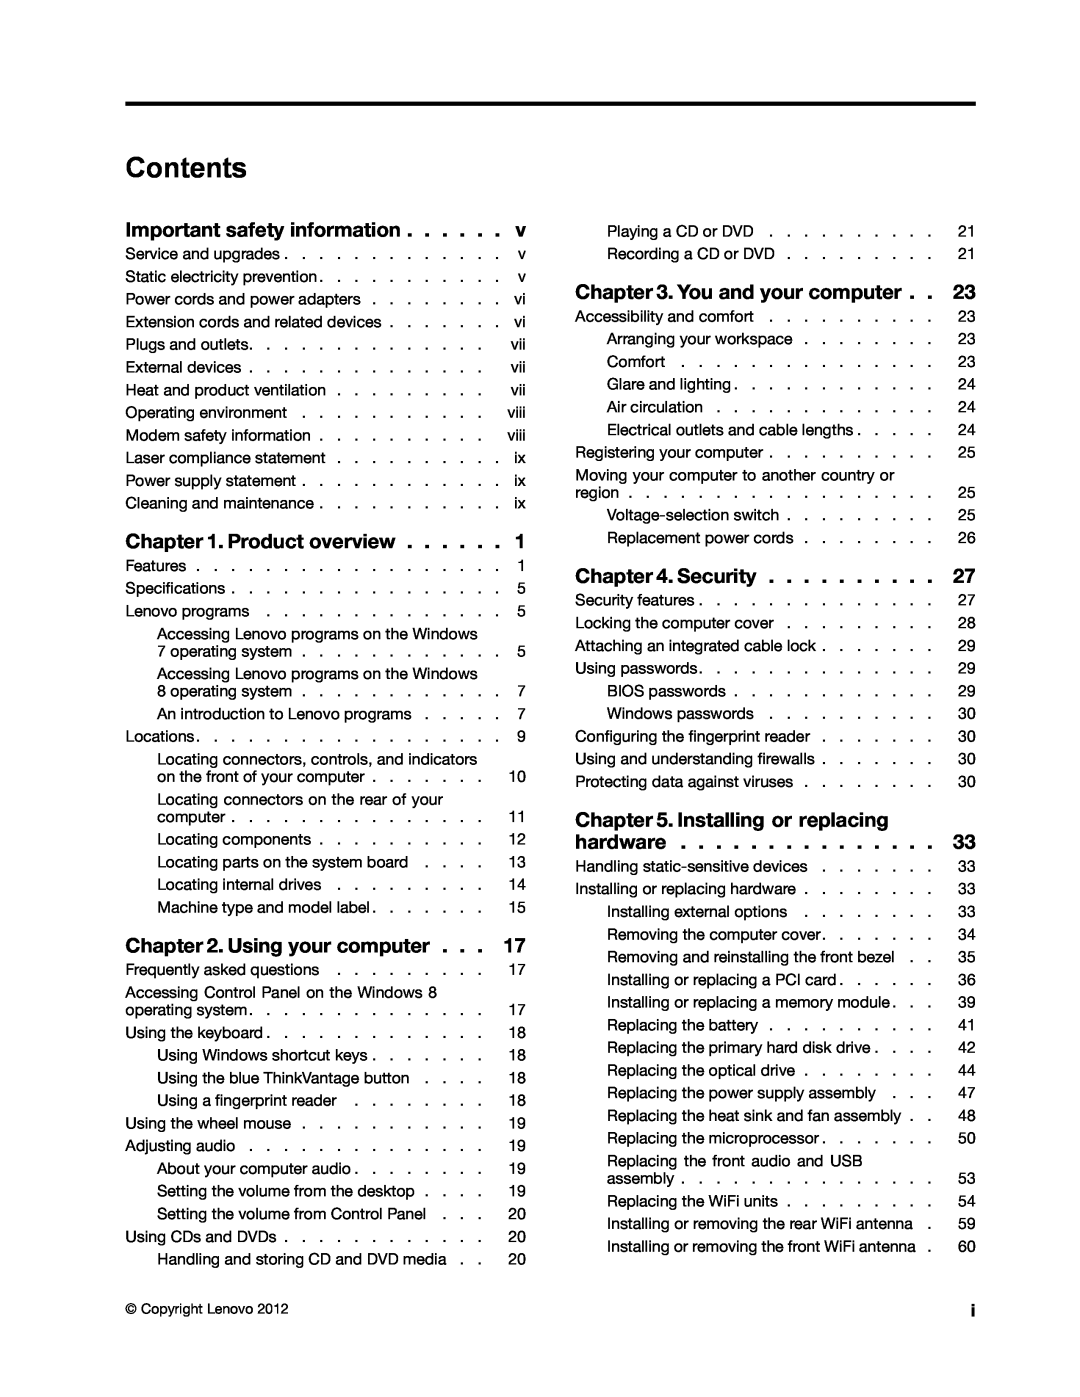 Lenovo 3484JMU manual Contents, Important safety information, Product overview, Using your computer, You and your computer 